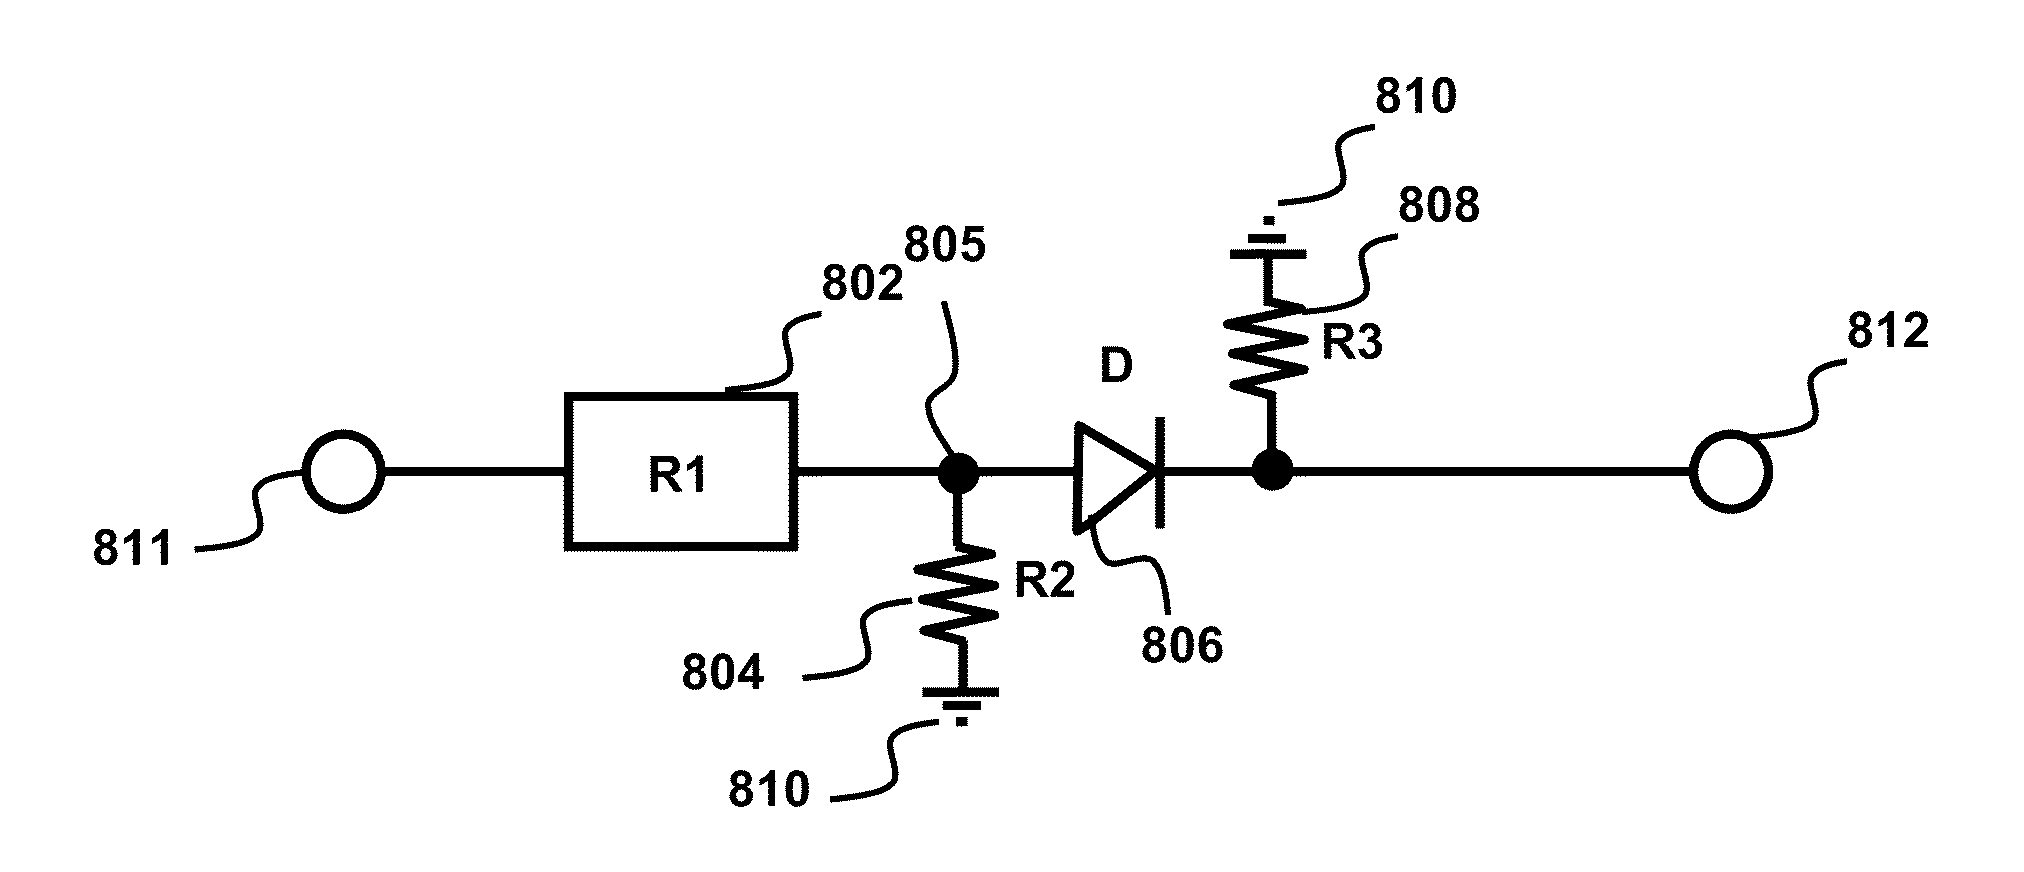 Critical Branching Neural Computation Apparatus and Methods